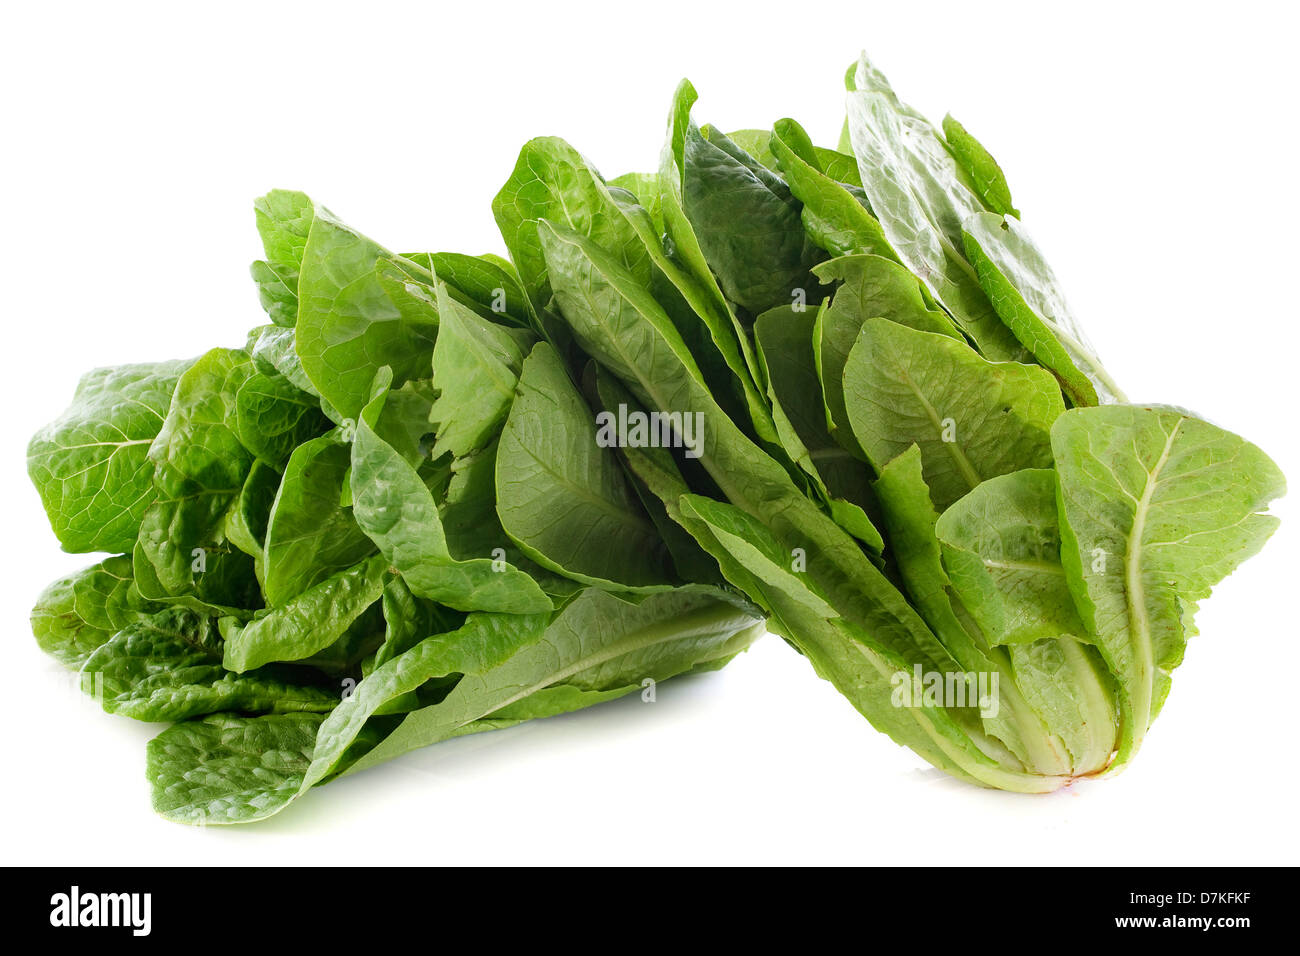 Romaine lettuces in front of white background Stock Photo